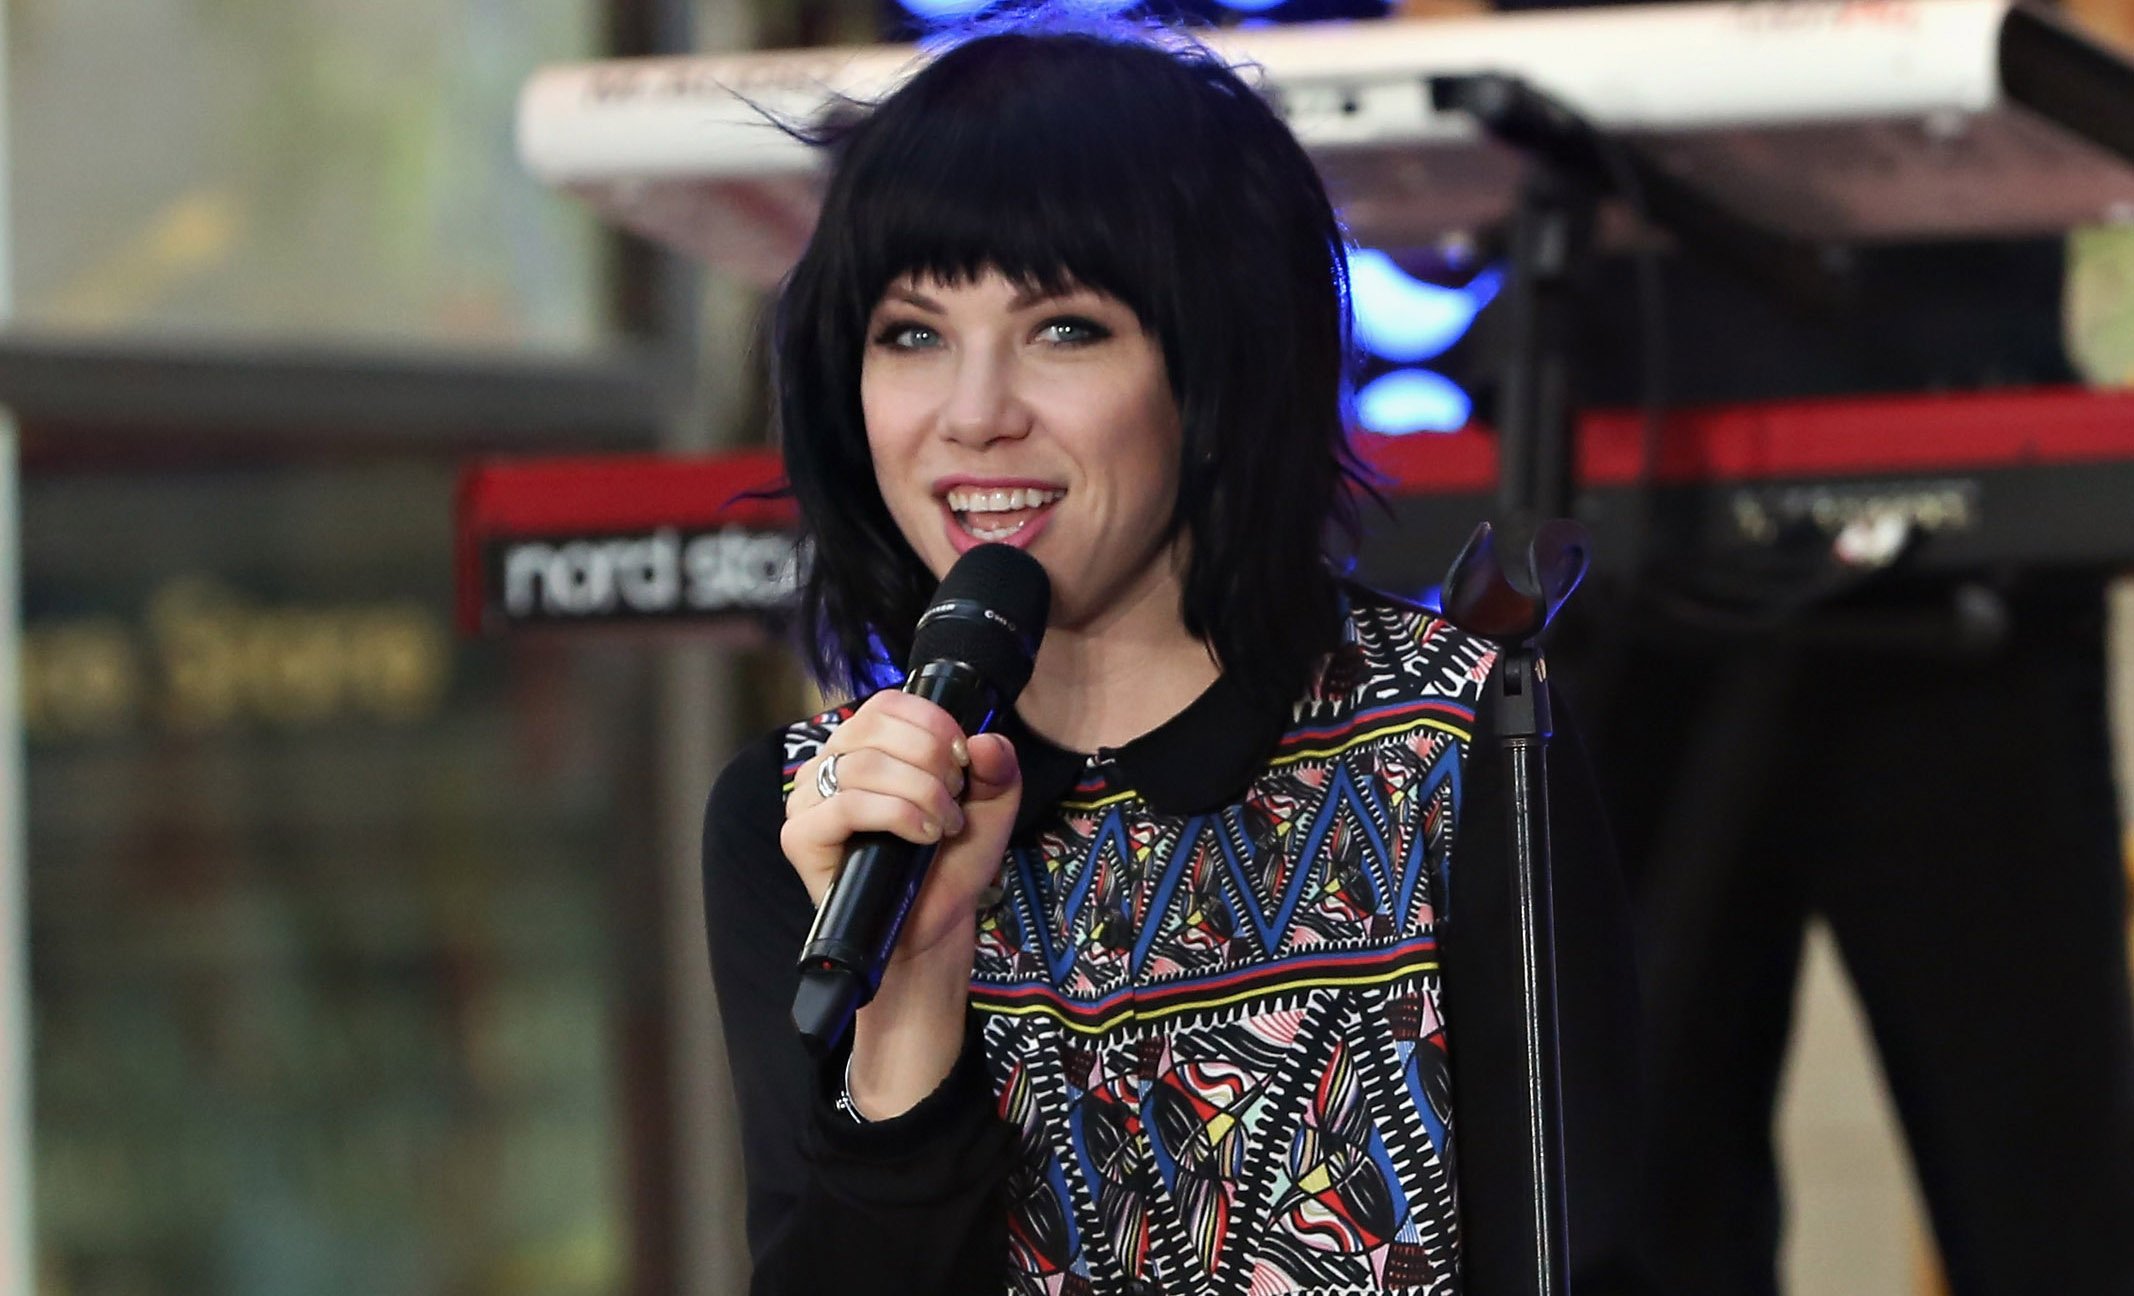 Carly Rae Jepsen On Re-Recording 'Everywhere You Look' for 'Fuller House' -  ABC News